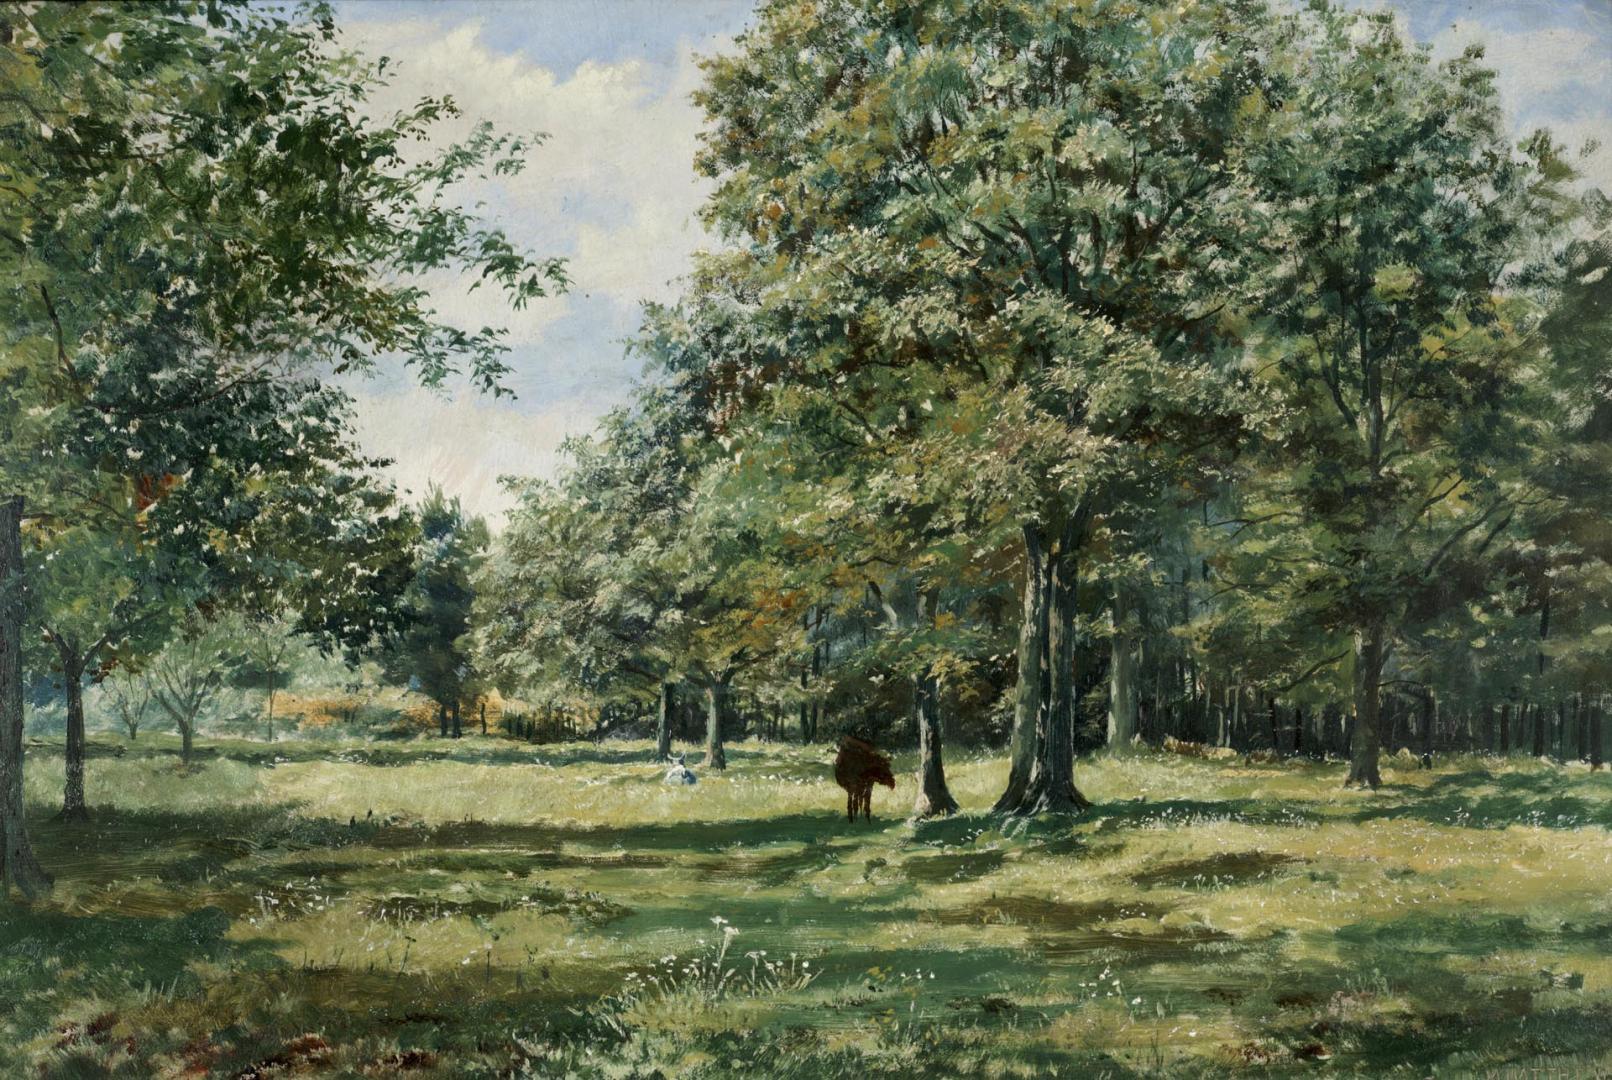 Painting shows a number of trees in the park.